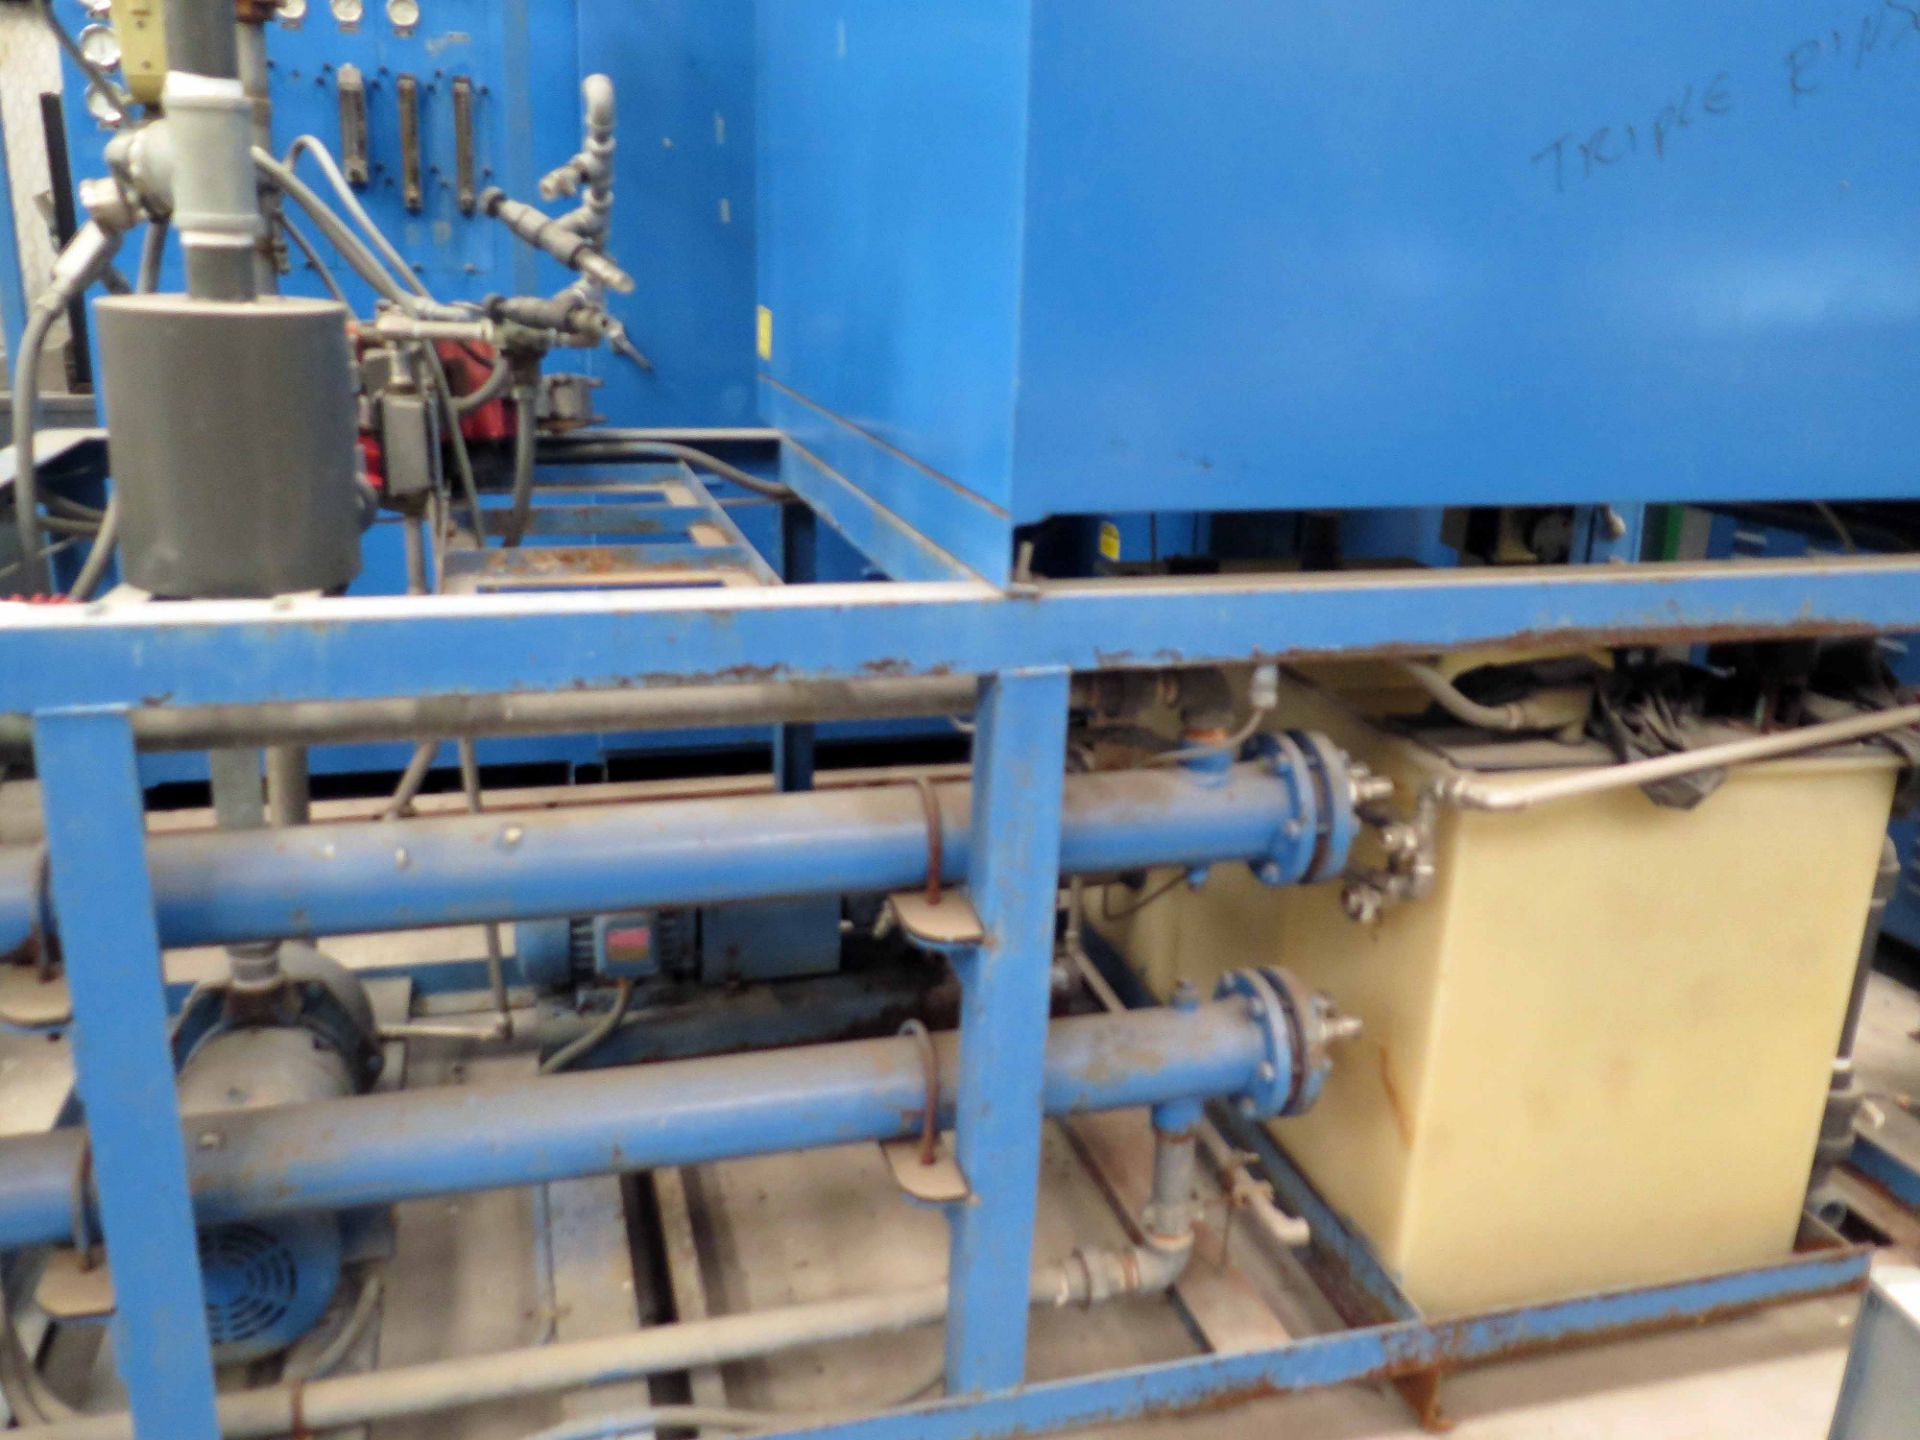 FLUORIDE ION CLEANING SYSTEM, TR COATING INC, including (2) 60 KVA & (1) 120 KVA pwr. supplies, - Image 17 of 26